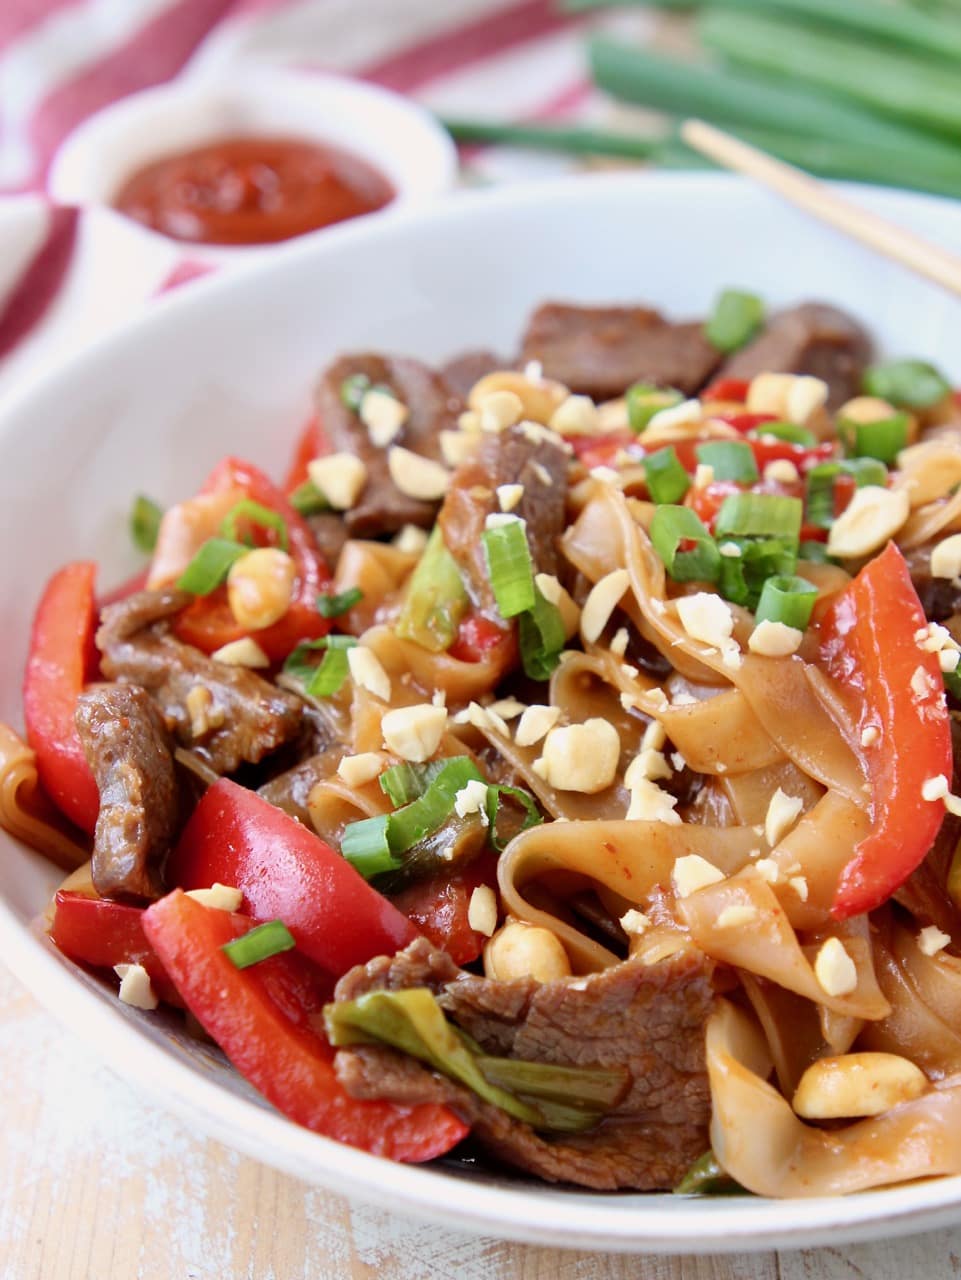 Kung pao beef, rice noodles and red bell peppers in white bowl topped with peanuts and green onions